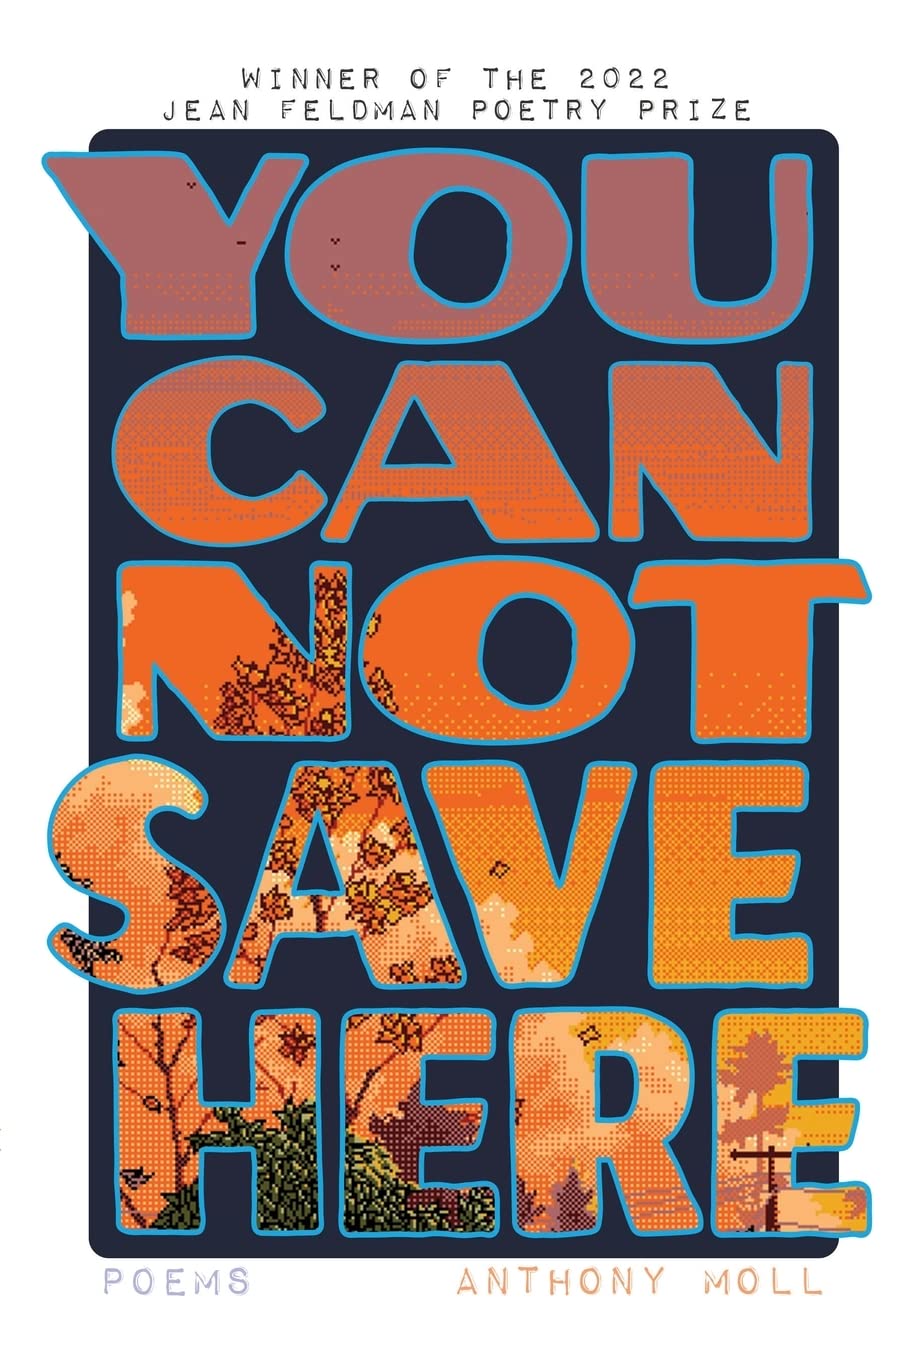 Image of front cover of book, titled "You Cannot Save Here"